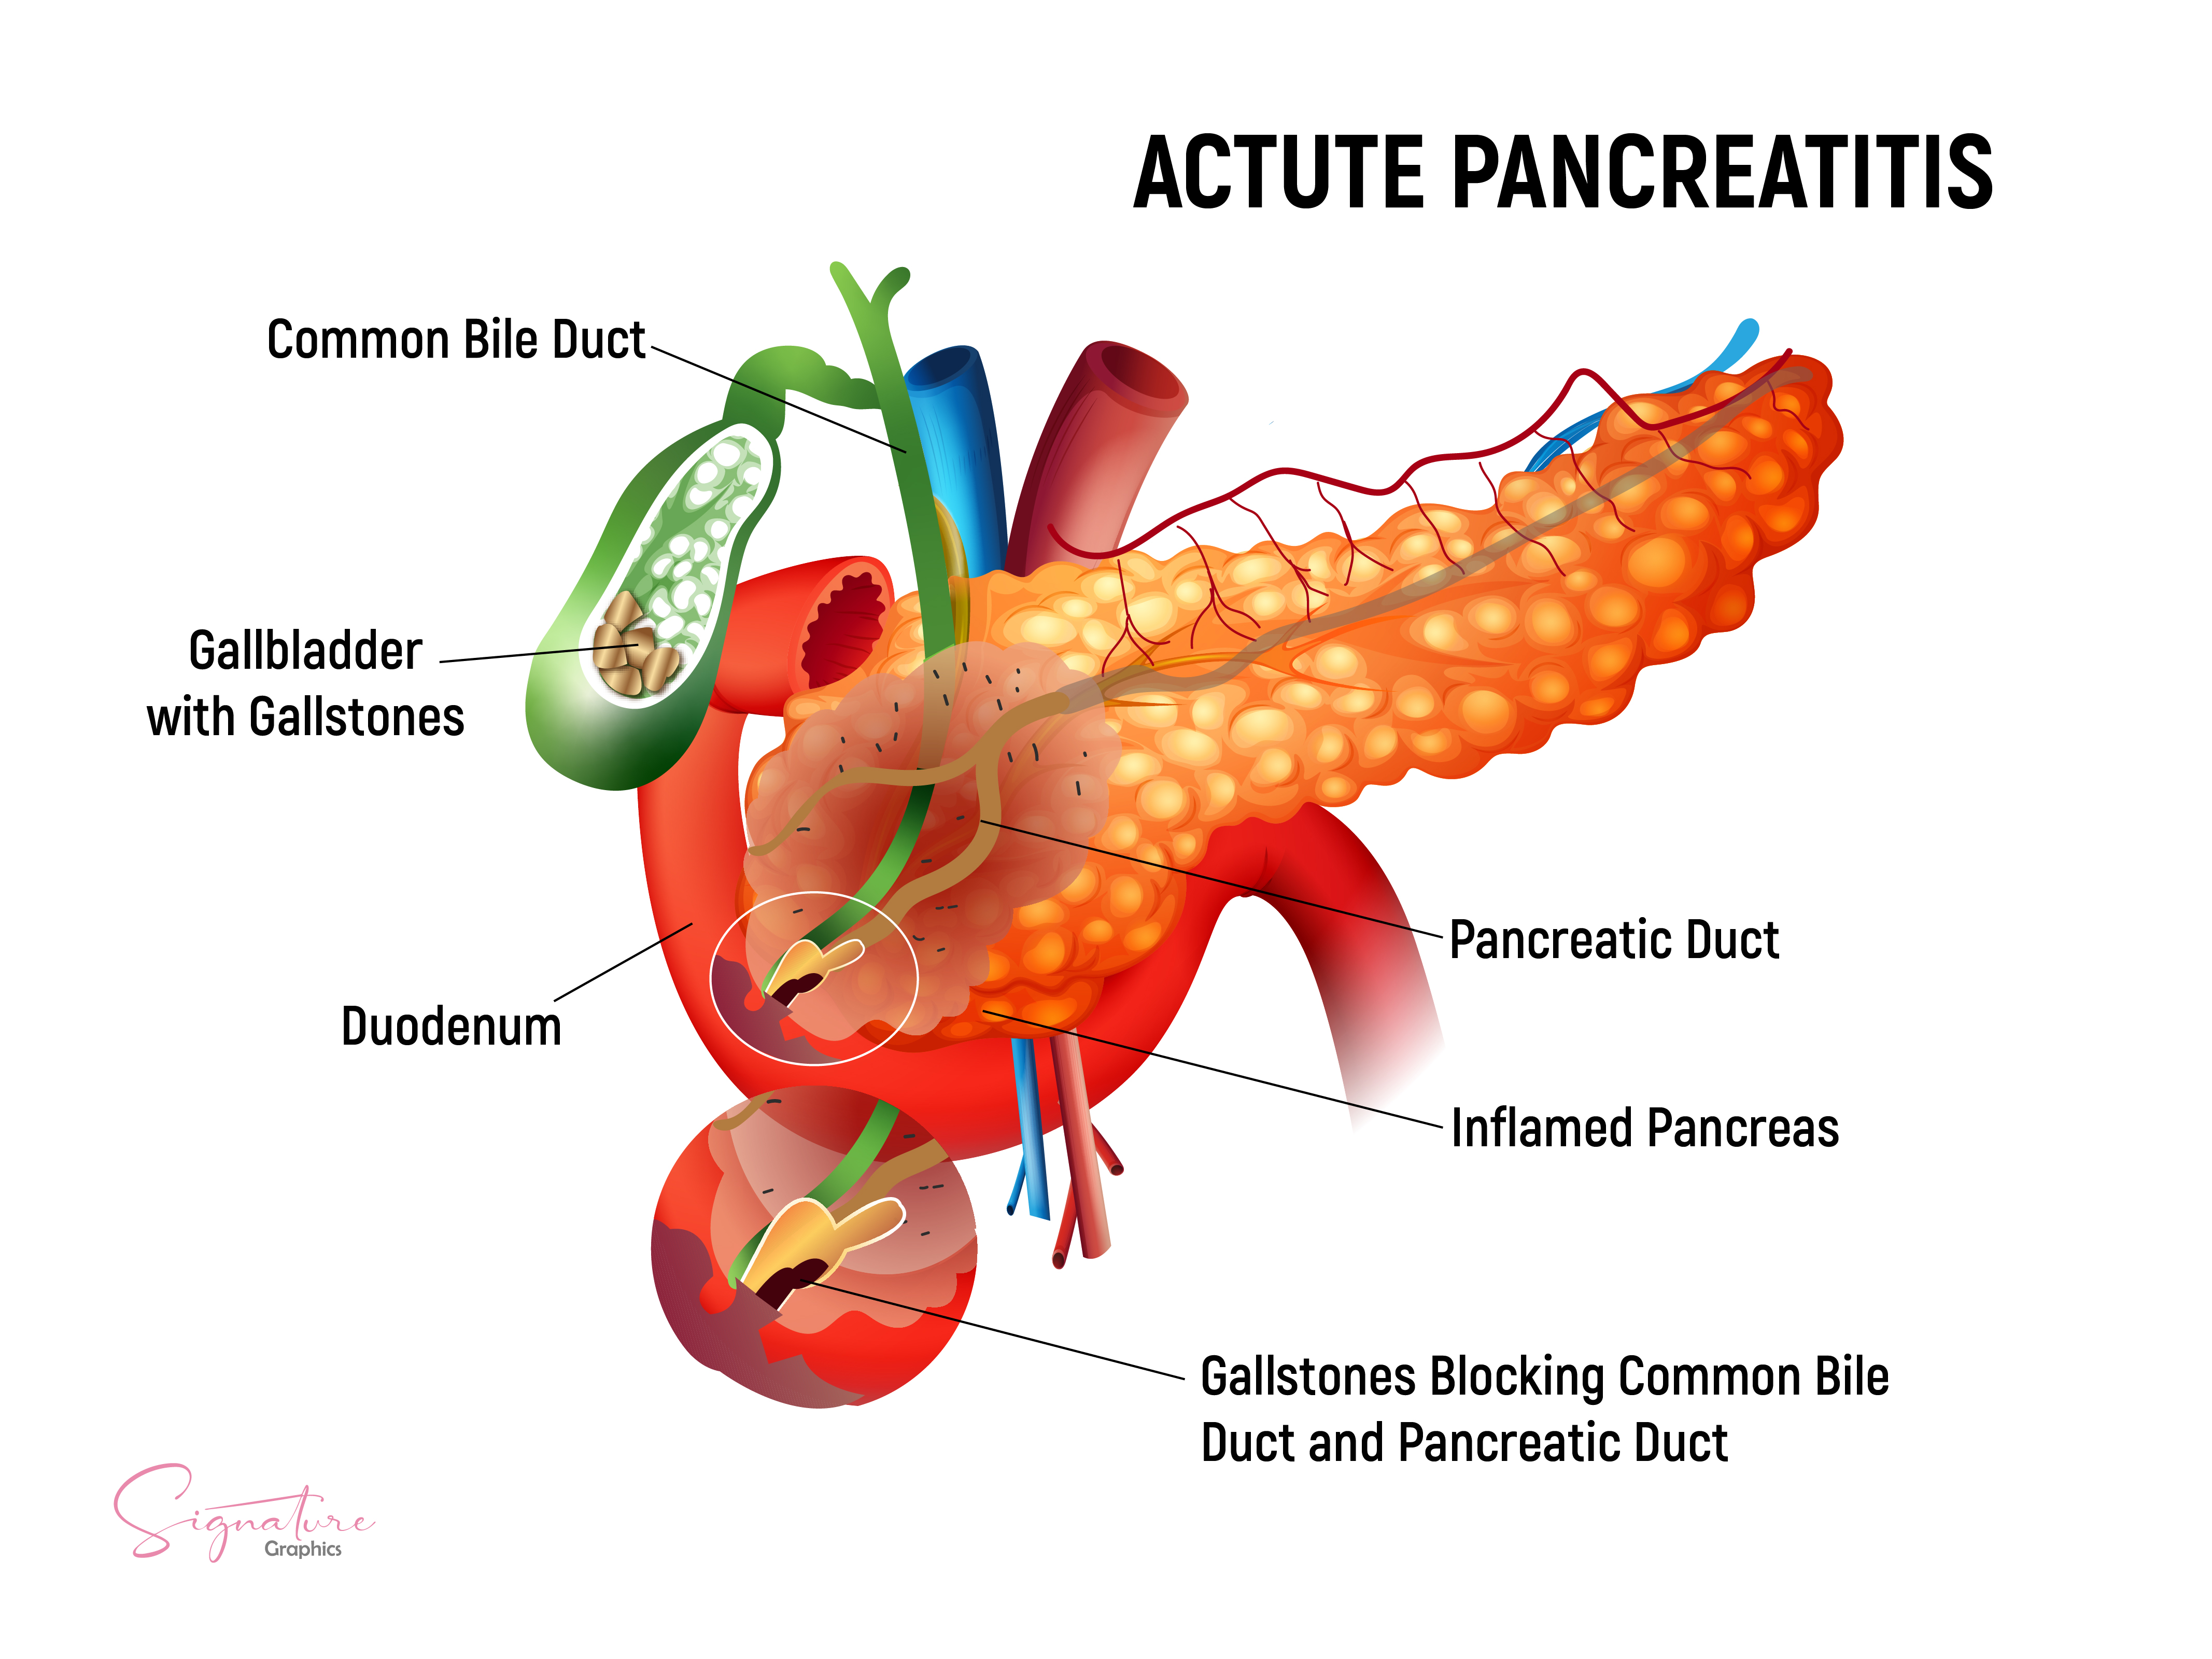 This is a graphic illustration of acute pancreatitis caused by gall stones